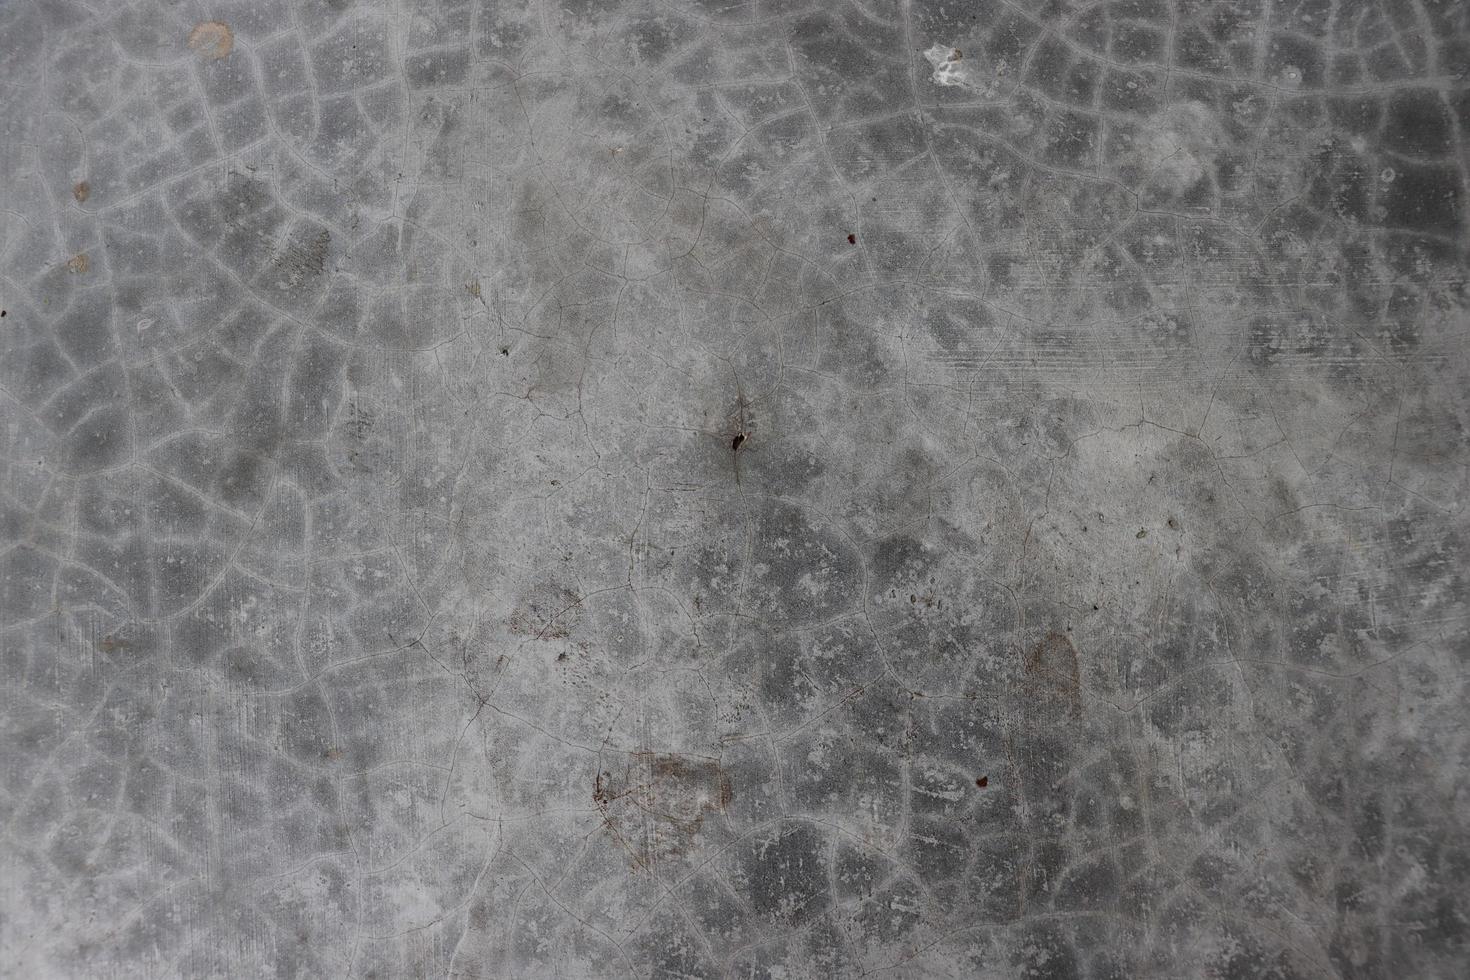 Broken concrete close-up photoshoot surface texture. Cement wall with gray color texture and grunge effect photo. Cracked concrete texture in the vintage gray color floor close-up shot. photo